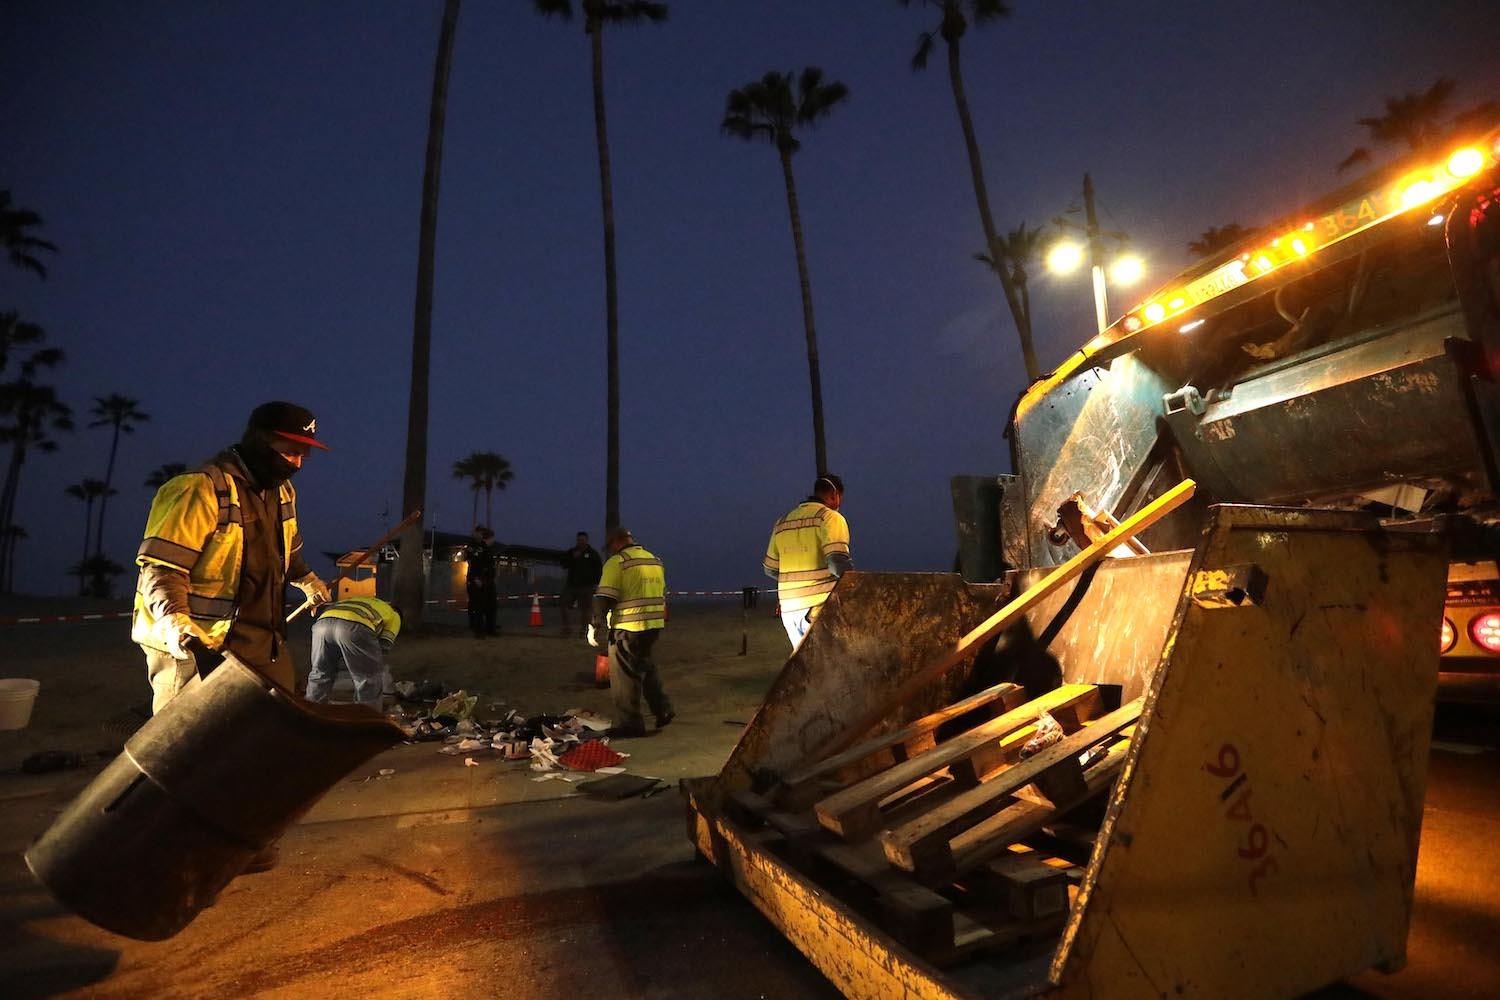 Sanitation workers clear a homeless encampment along Ocean Front Walk around 5 a.m. in Venice on July 8, 2021.